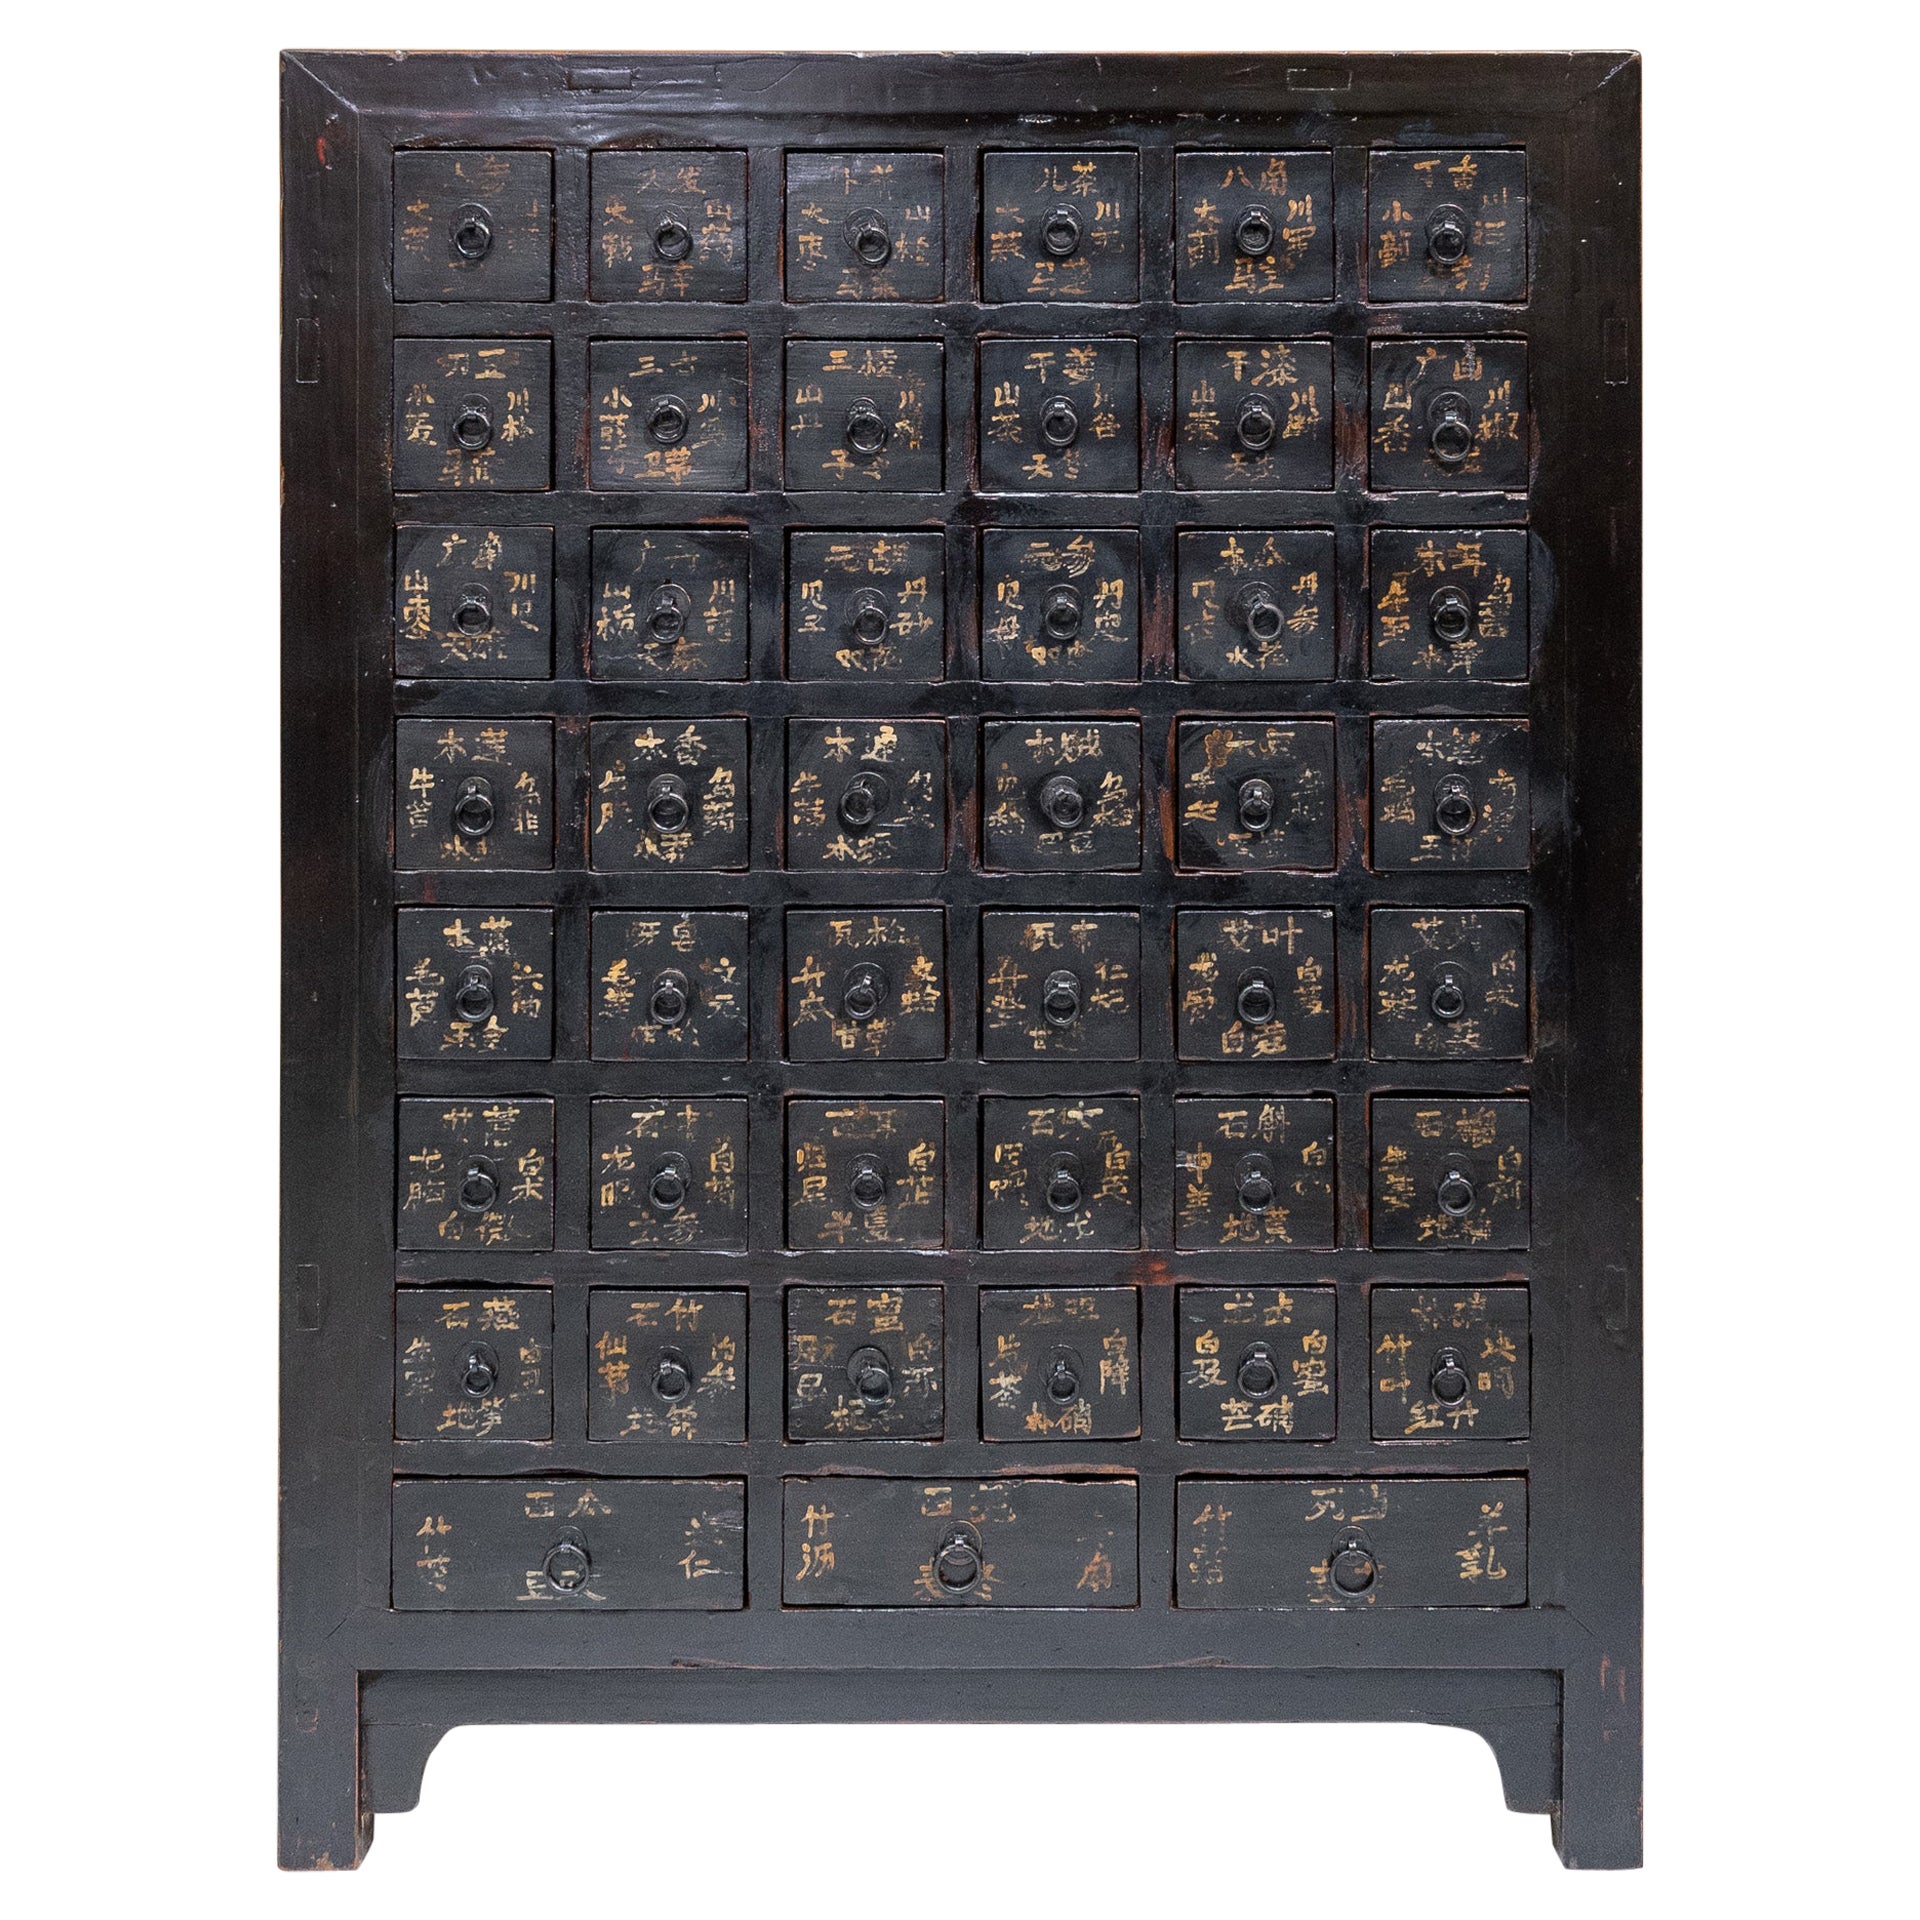 Late 19th Century Chinese Medicine Cabinet